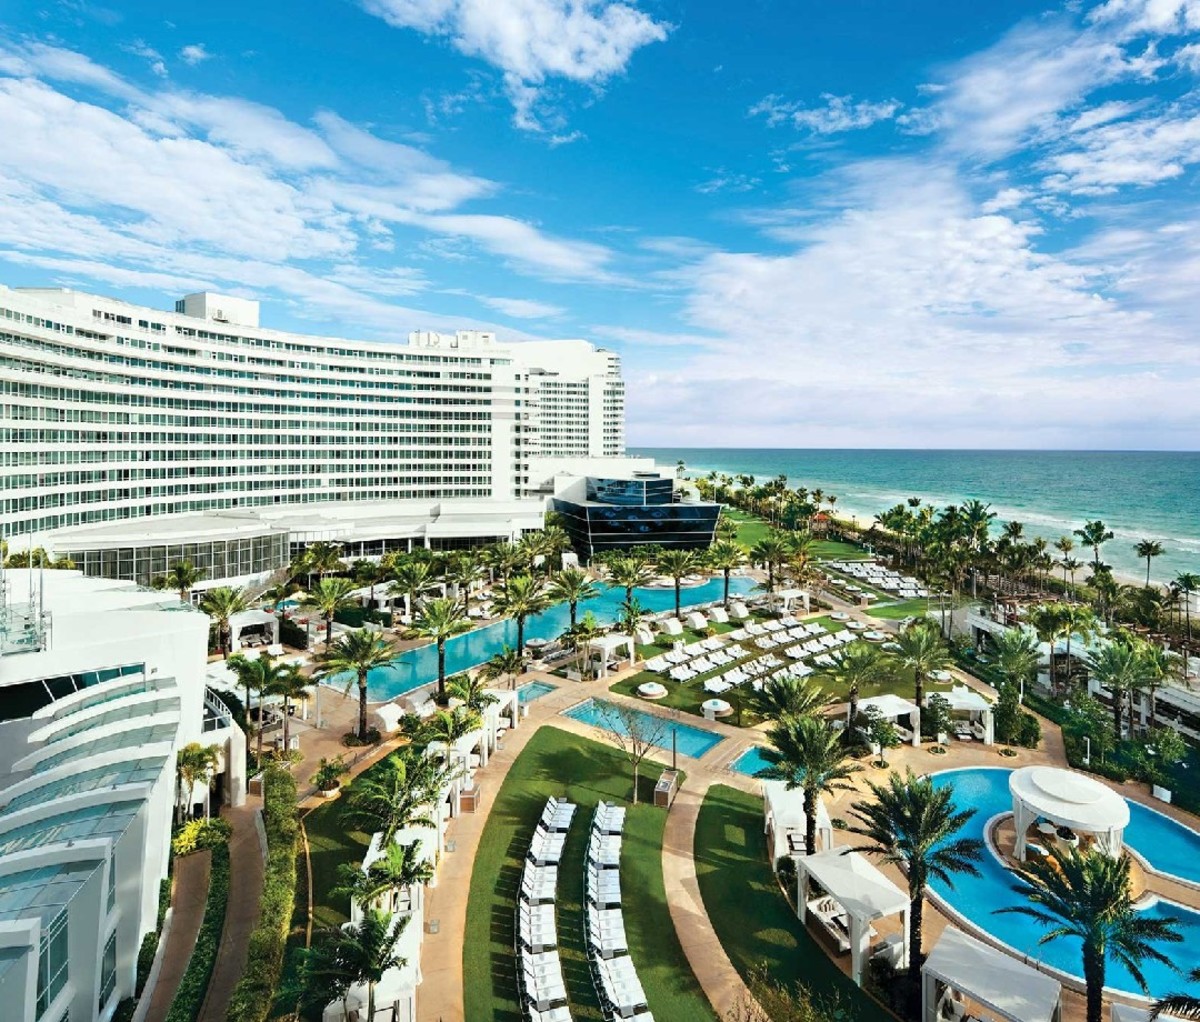 A view of the pool area, ocean, and the Fontainebleau Hotel in Miami Beach, Florida.